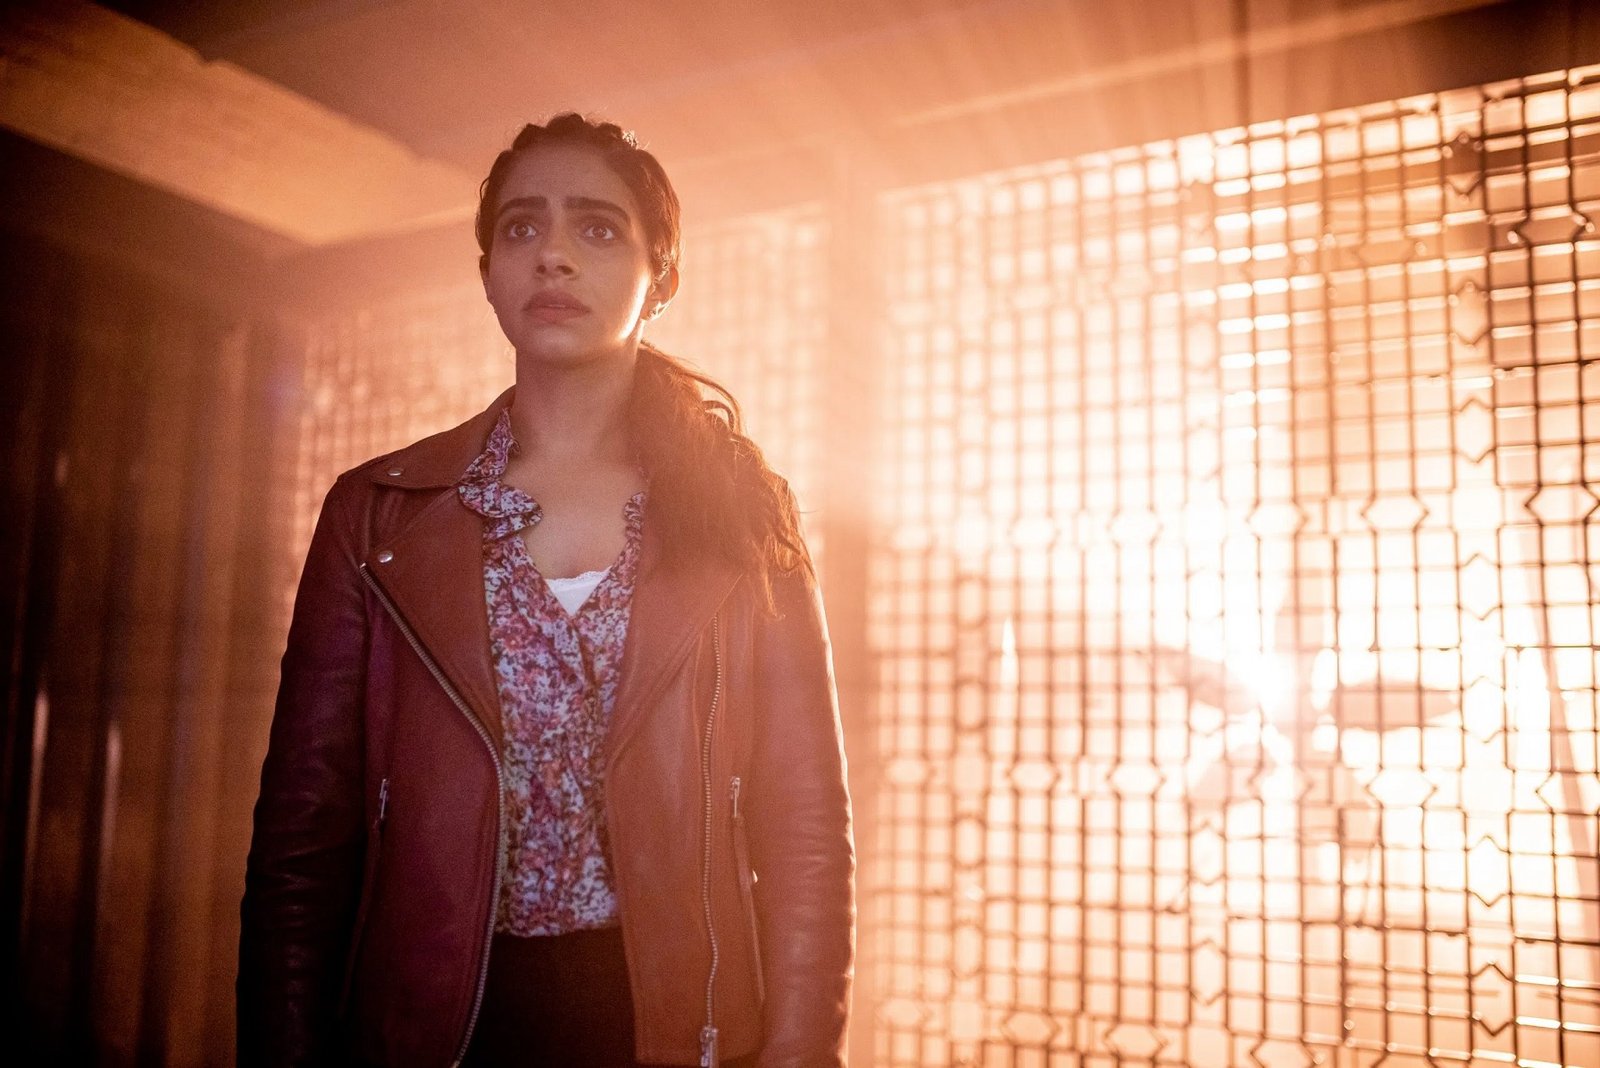 Mandip Gill: “I Thought I’d Never Be in Doctor Who”